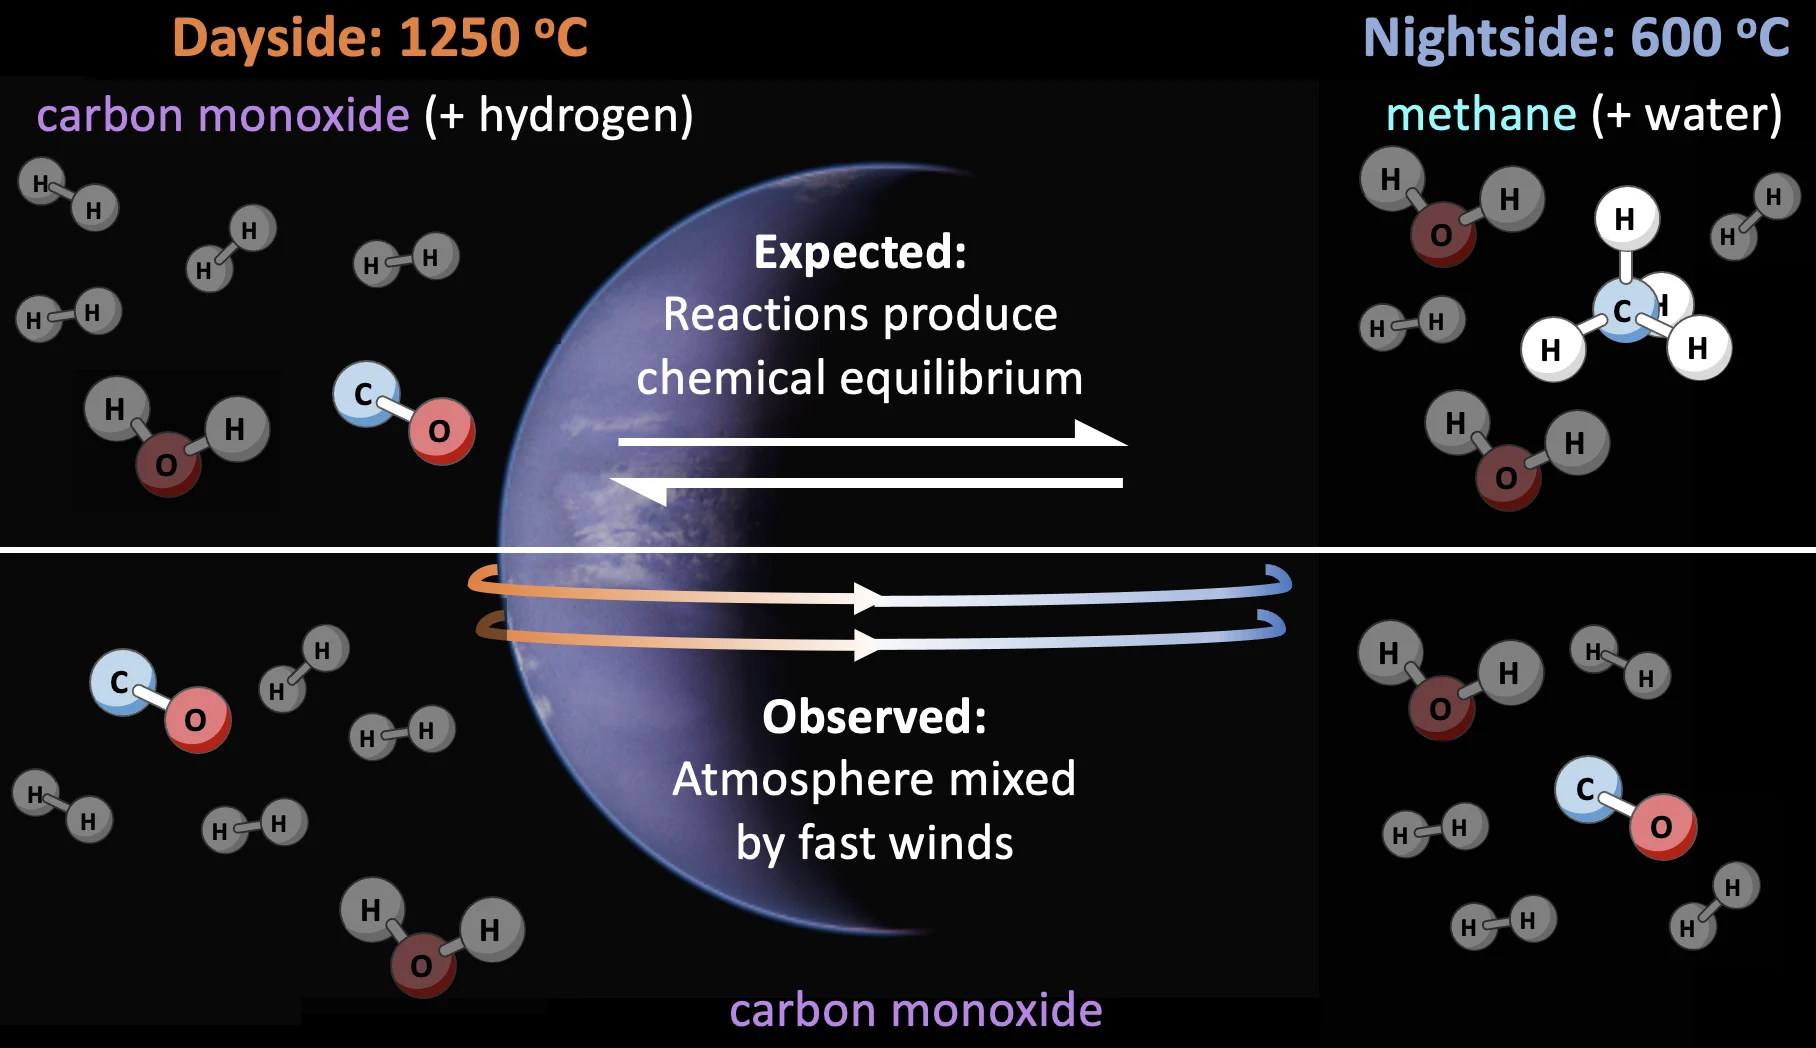 wasp43b mixing schematic expected vs observed no methane